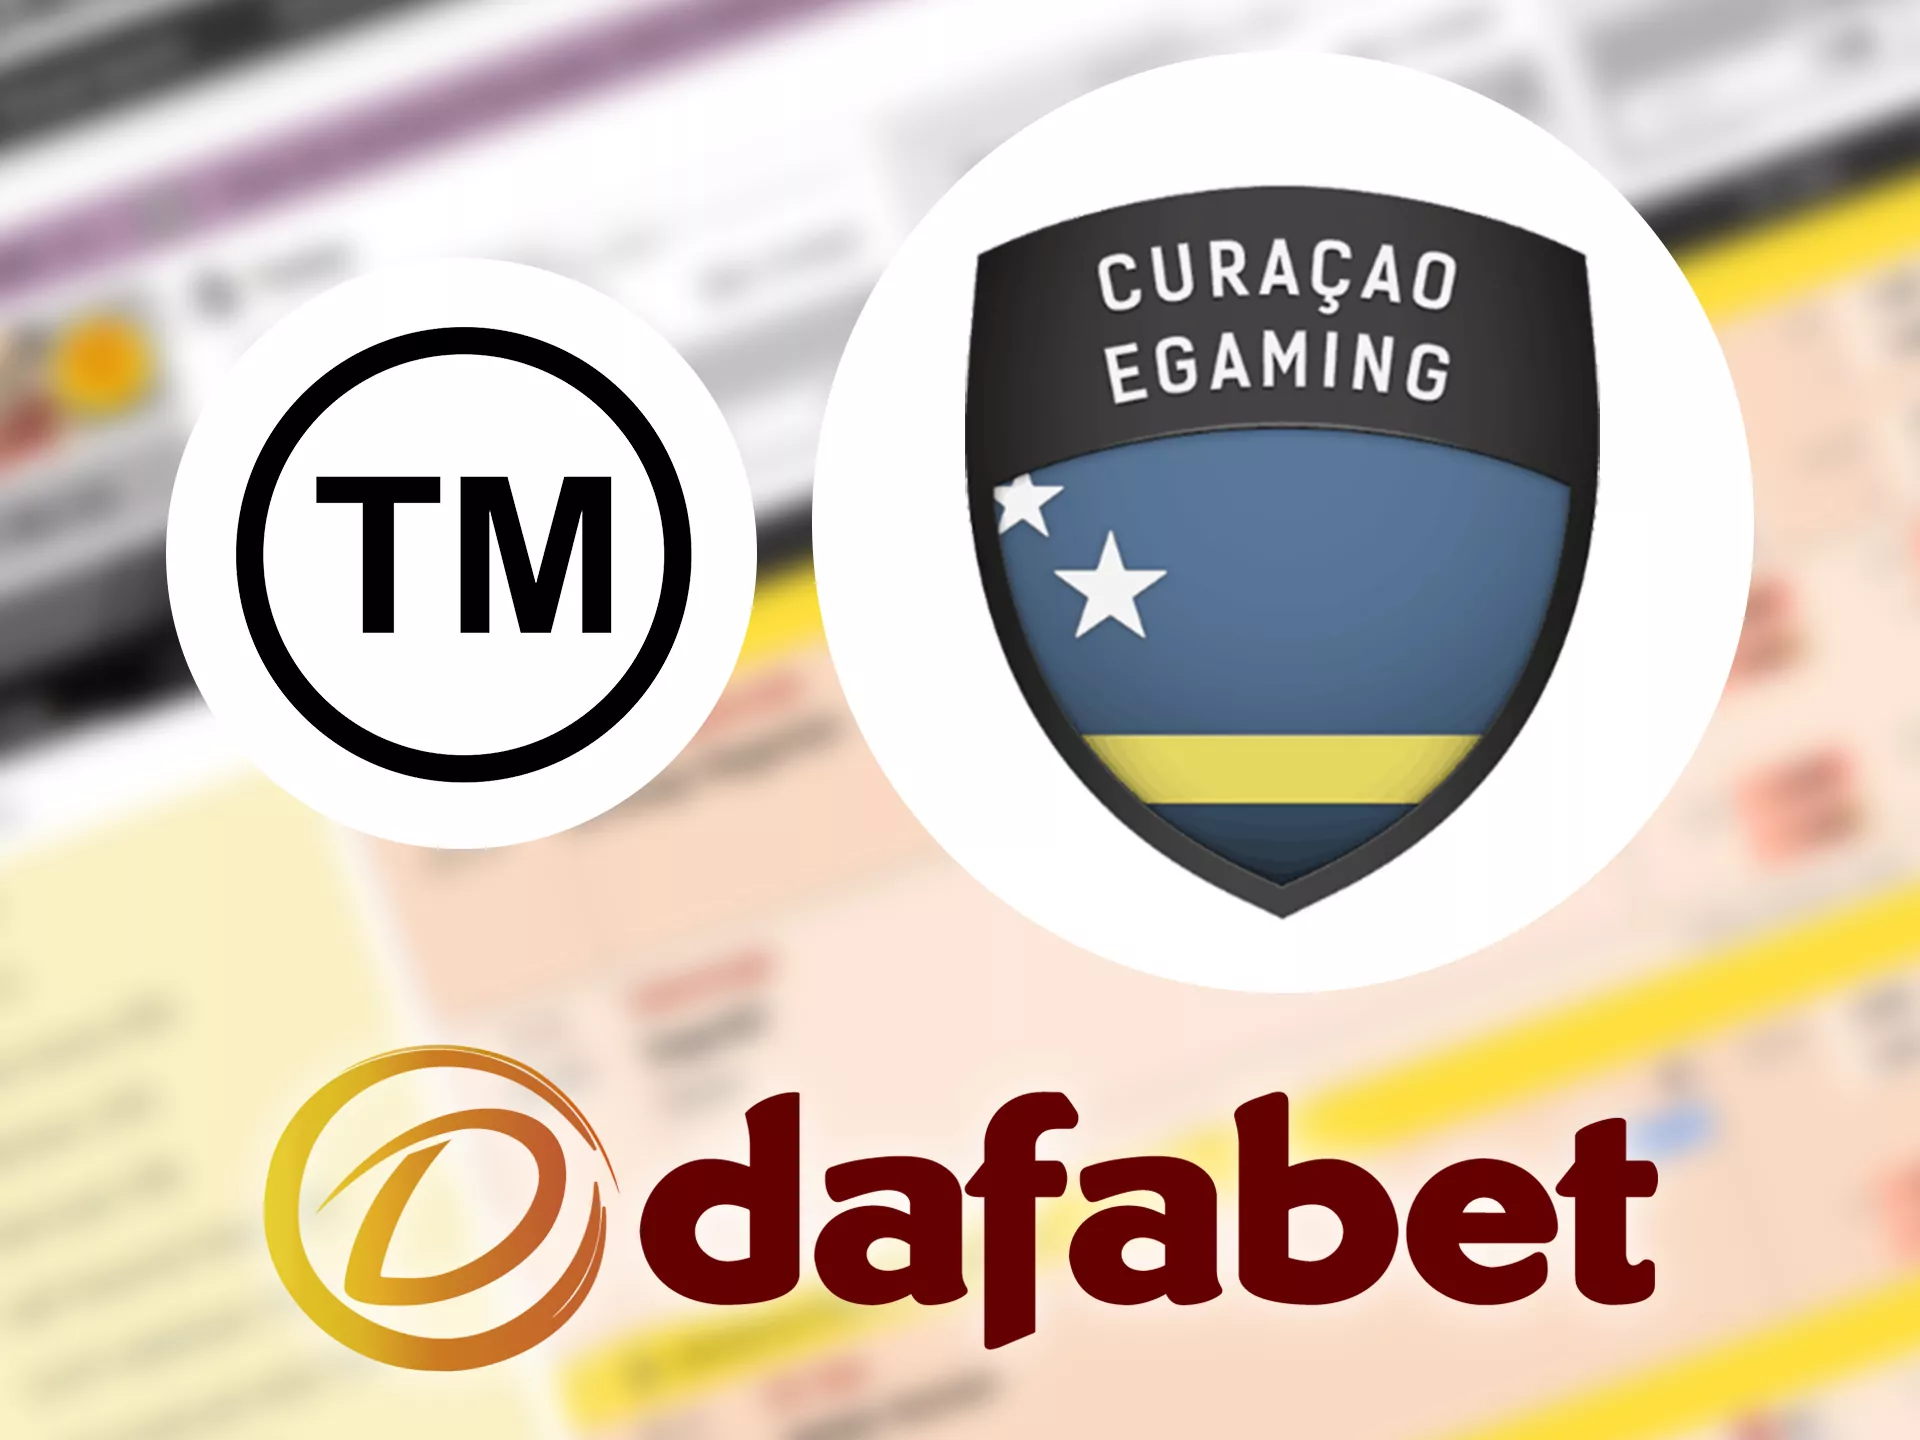 Dafabet contains multiple brands.